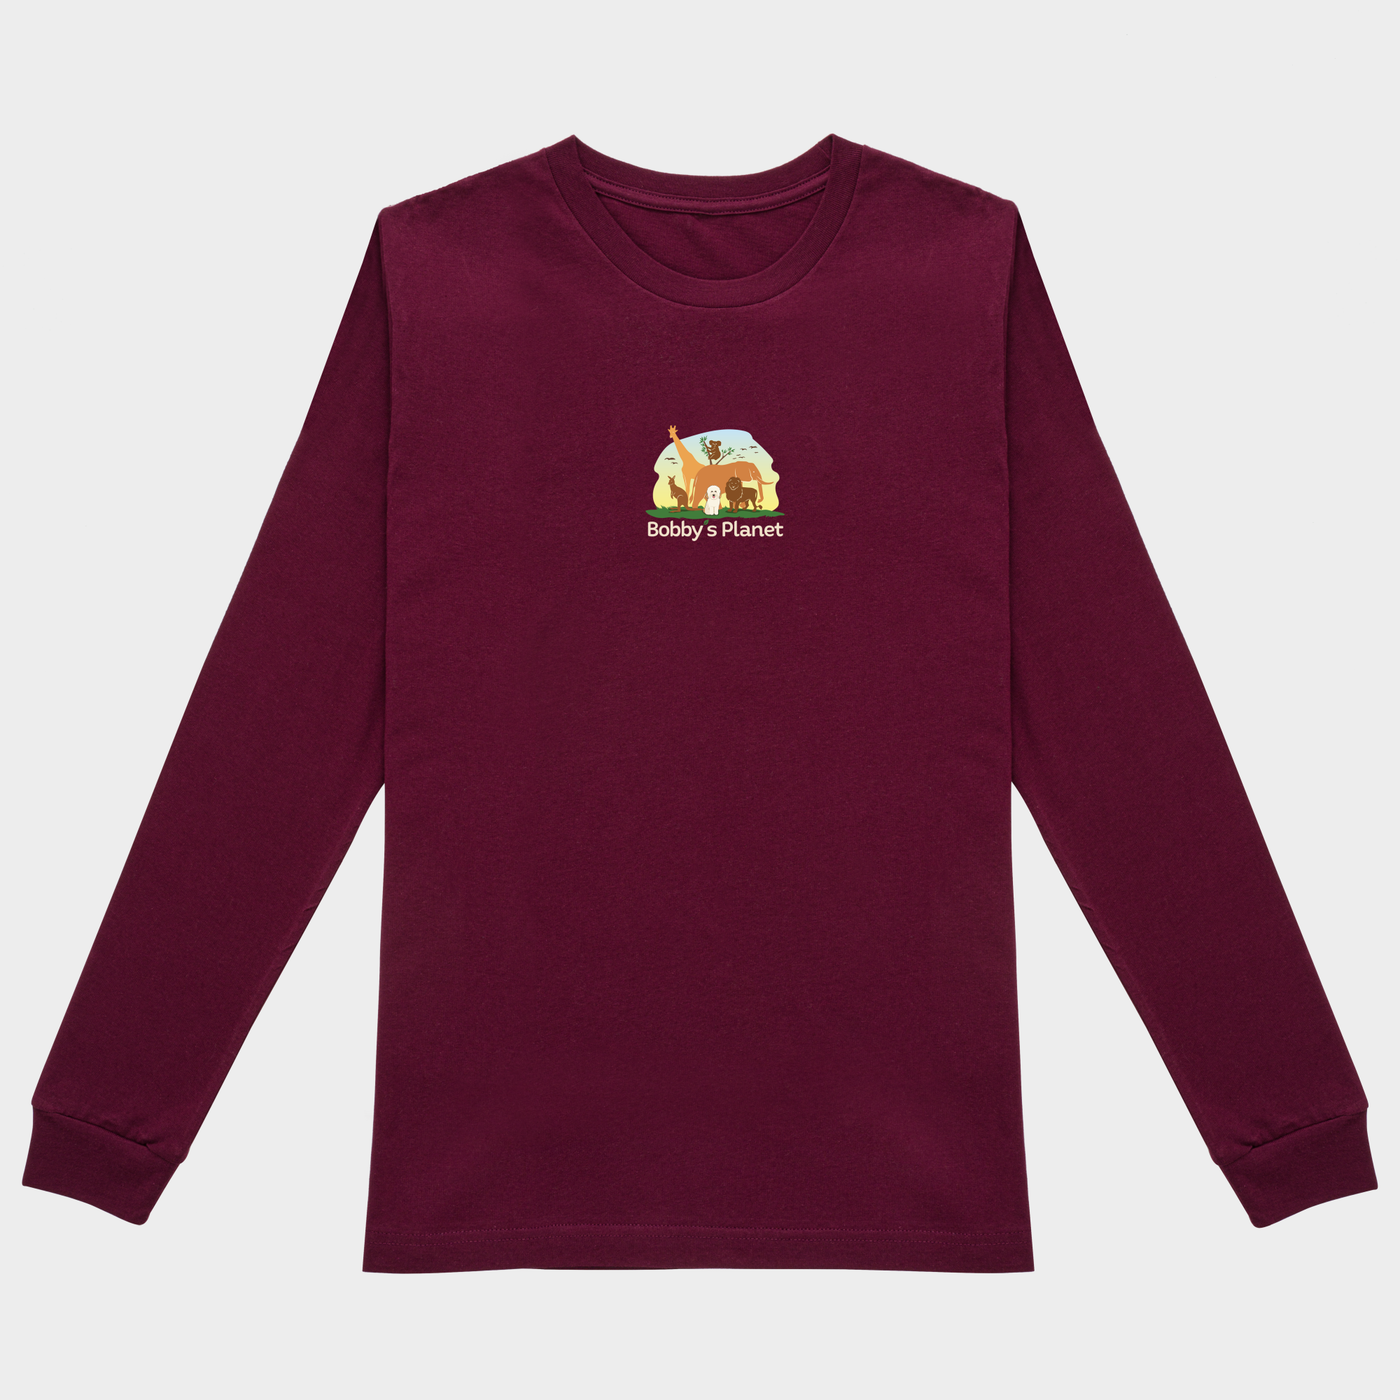 Bobby's Planet Women's Embroidered Poodle Long Sleeve Shirt from Bobbys Planet Toy Poodle Collection in Maroon Color#color_maroon